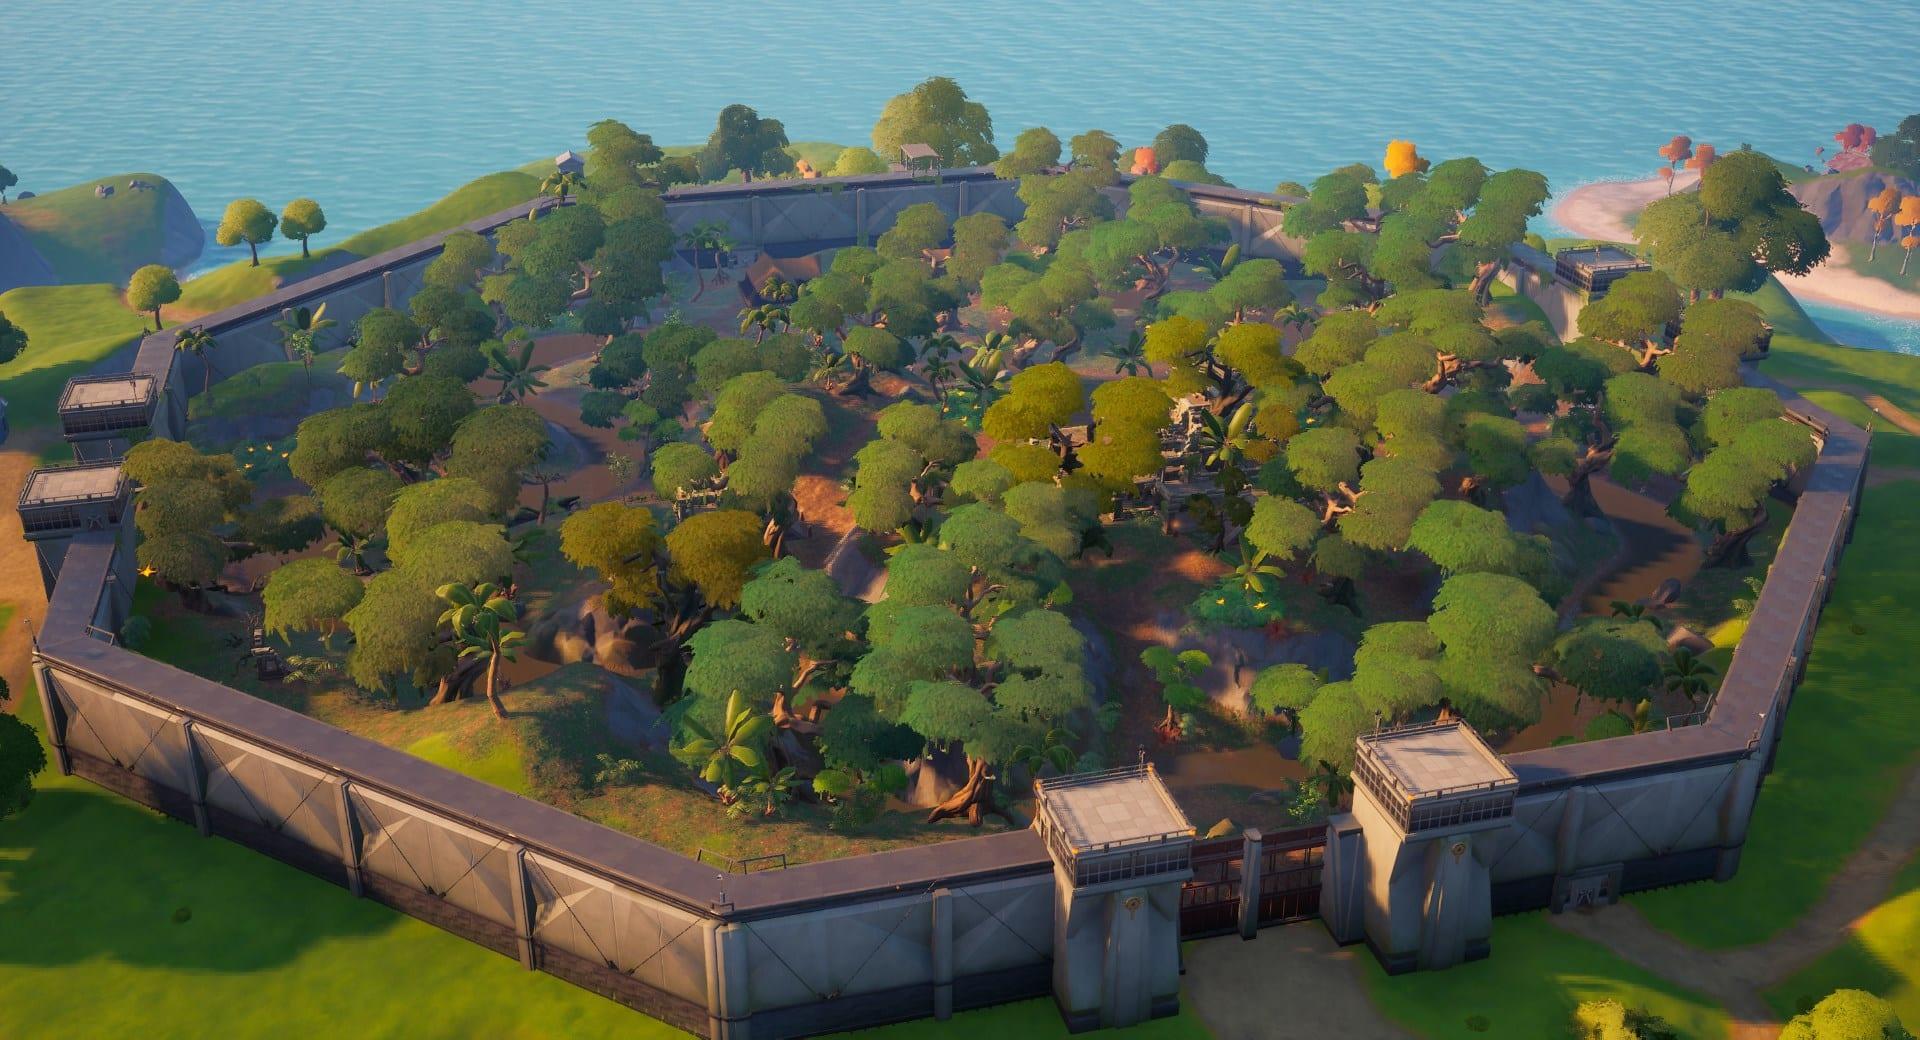 Stealthy Stronghold in Fortnite Season 5.